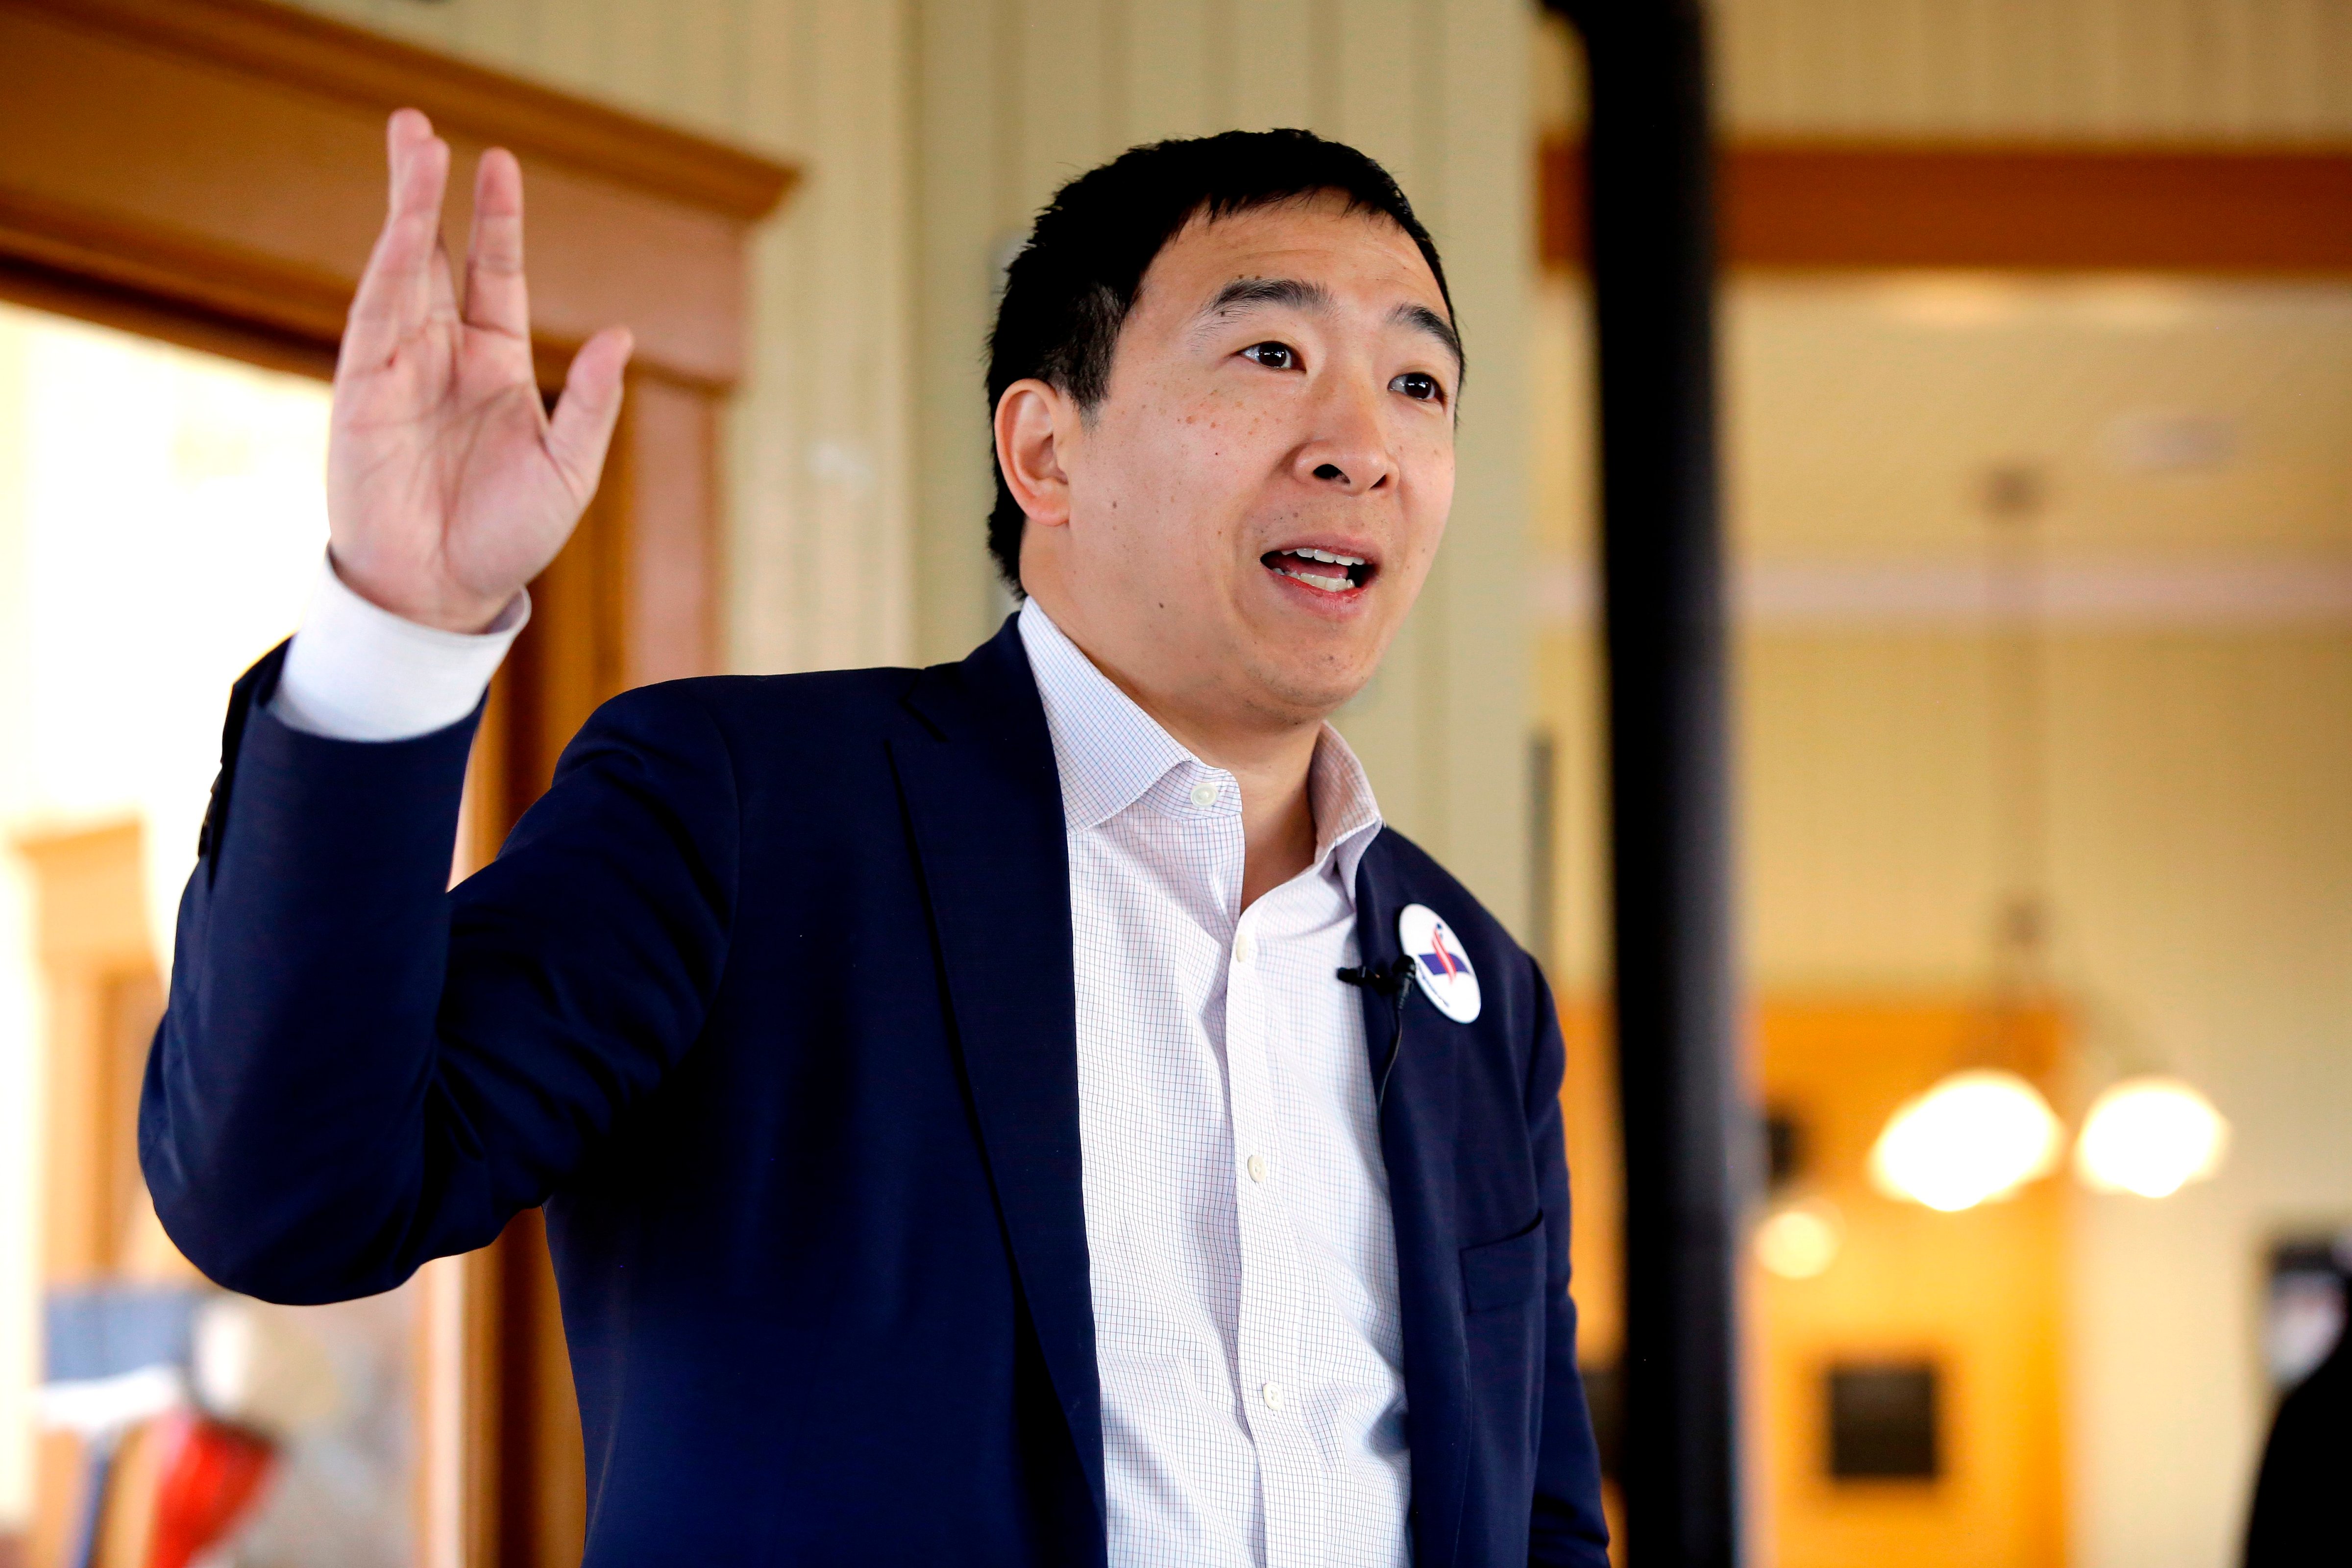 Entrepreneur and 2020 presidential candidate Andrew Yang speaks during a campaign stop at the train depot on February 1, 2019 in Jefferson, Iowa. (JOSHUA LOTT—AFP/Getty Images Entrepreneur and 2020 presidential candidate Andrew Yang speaks during a campaign stop at the train depot on February 1, 2019 in Jefferson, Iowa.)